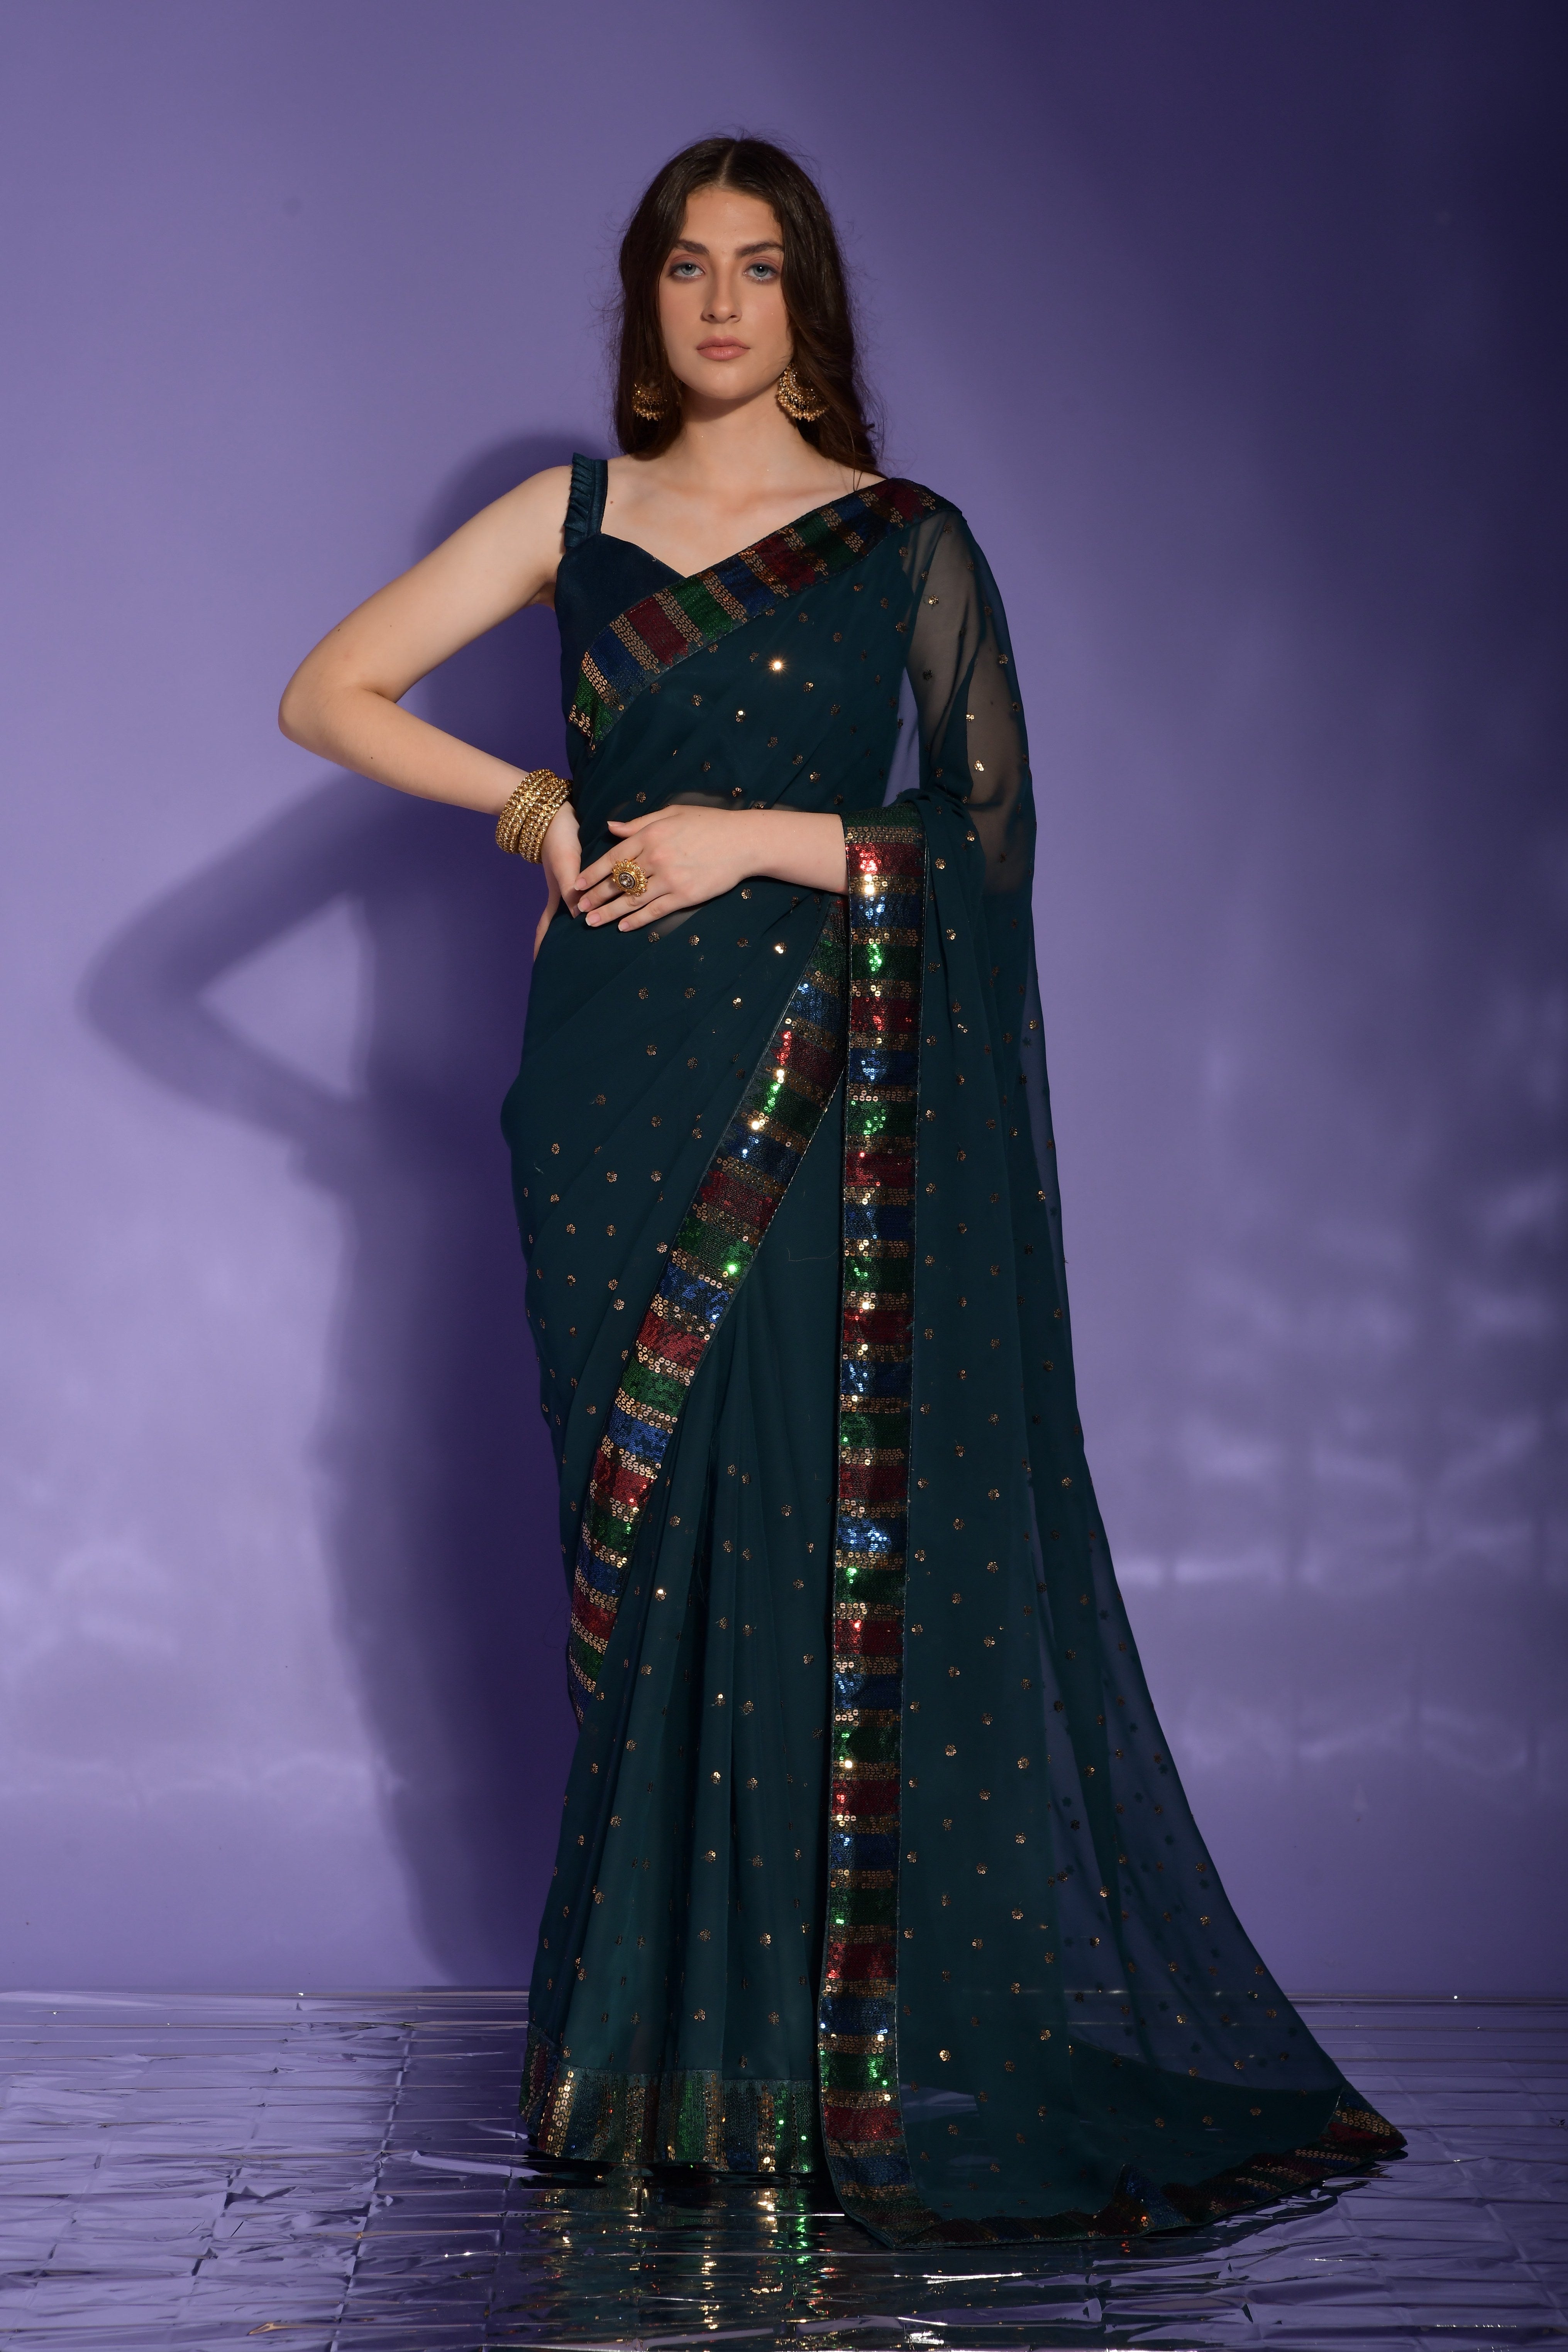 Beautiful Teal Blue Sequence embroidery work Lace Border Saree For Women